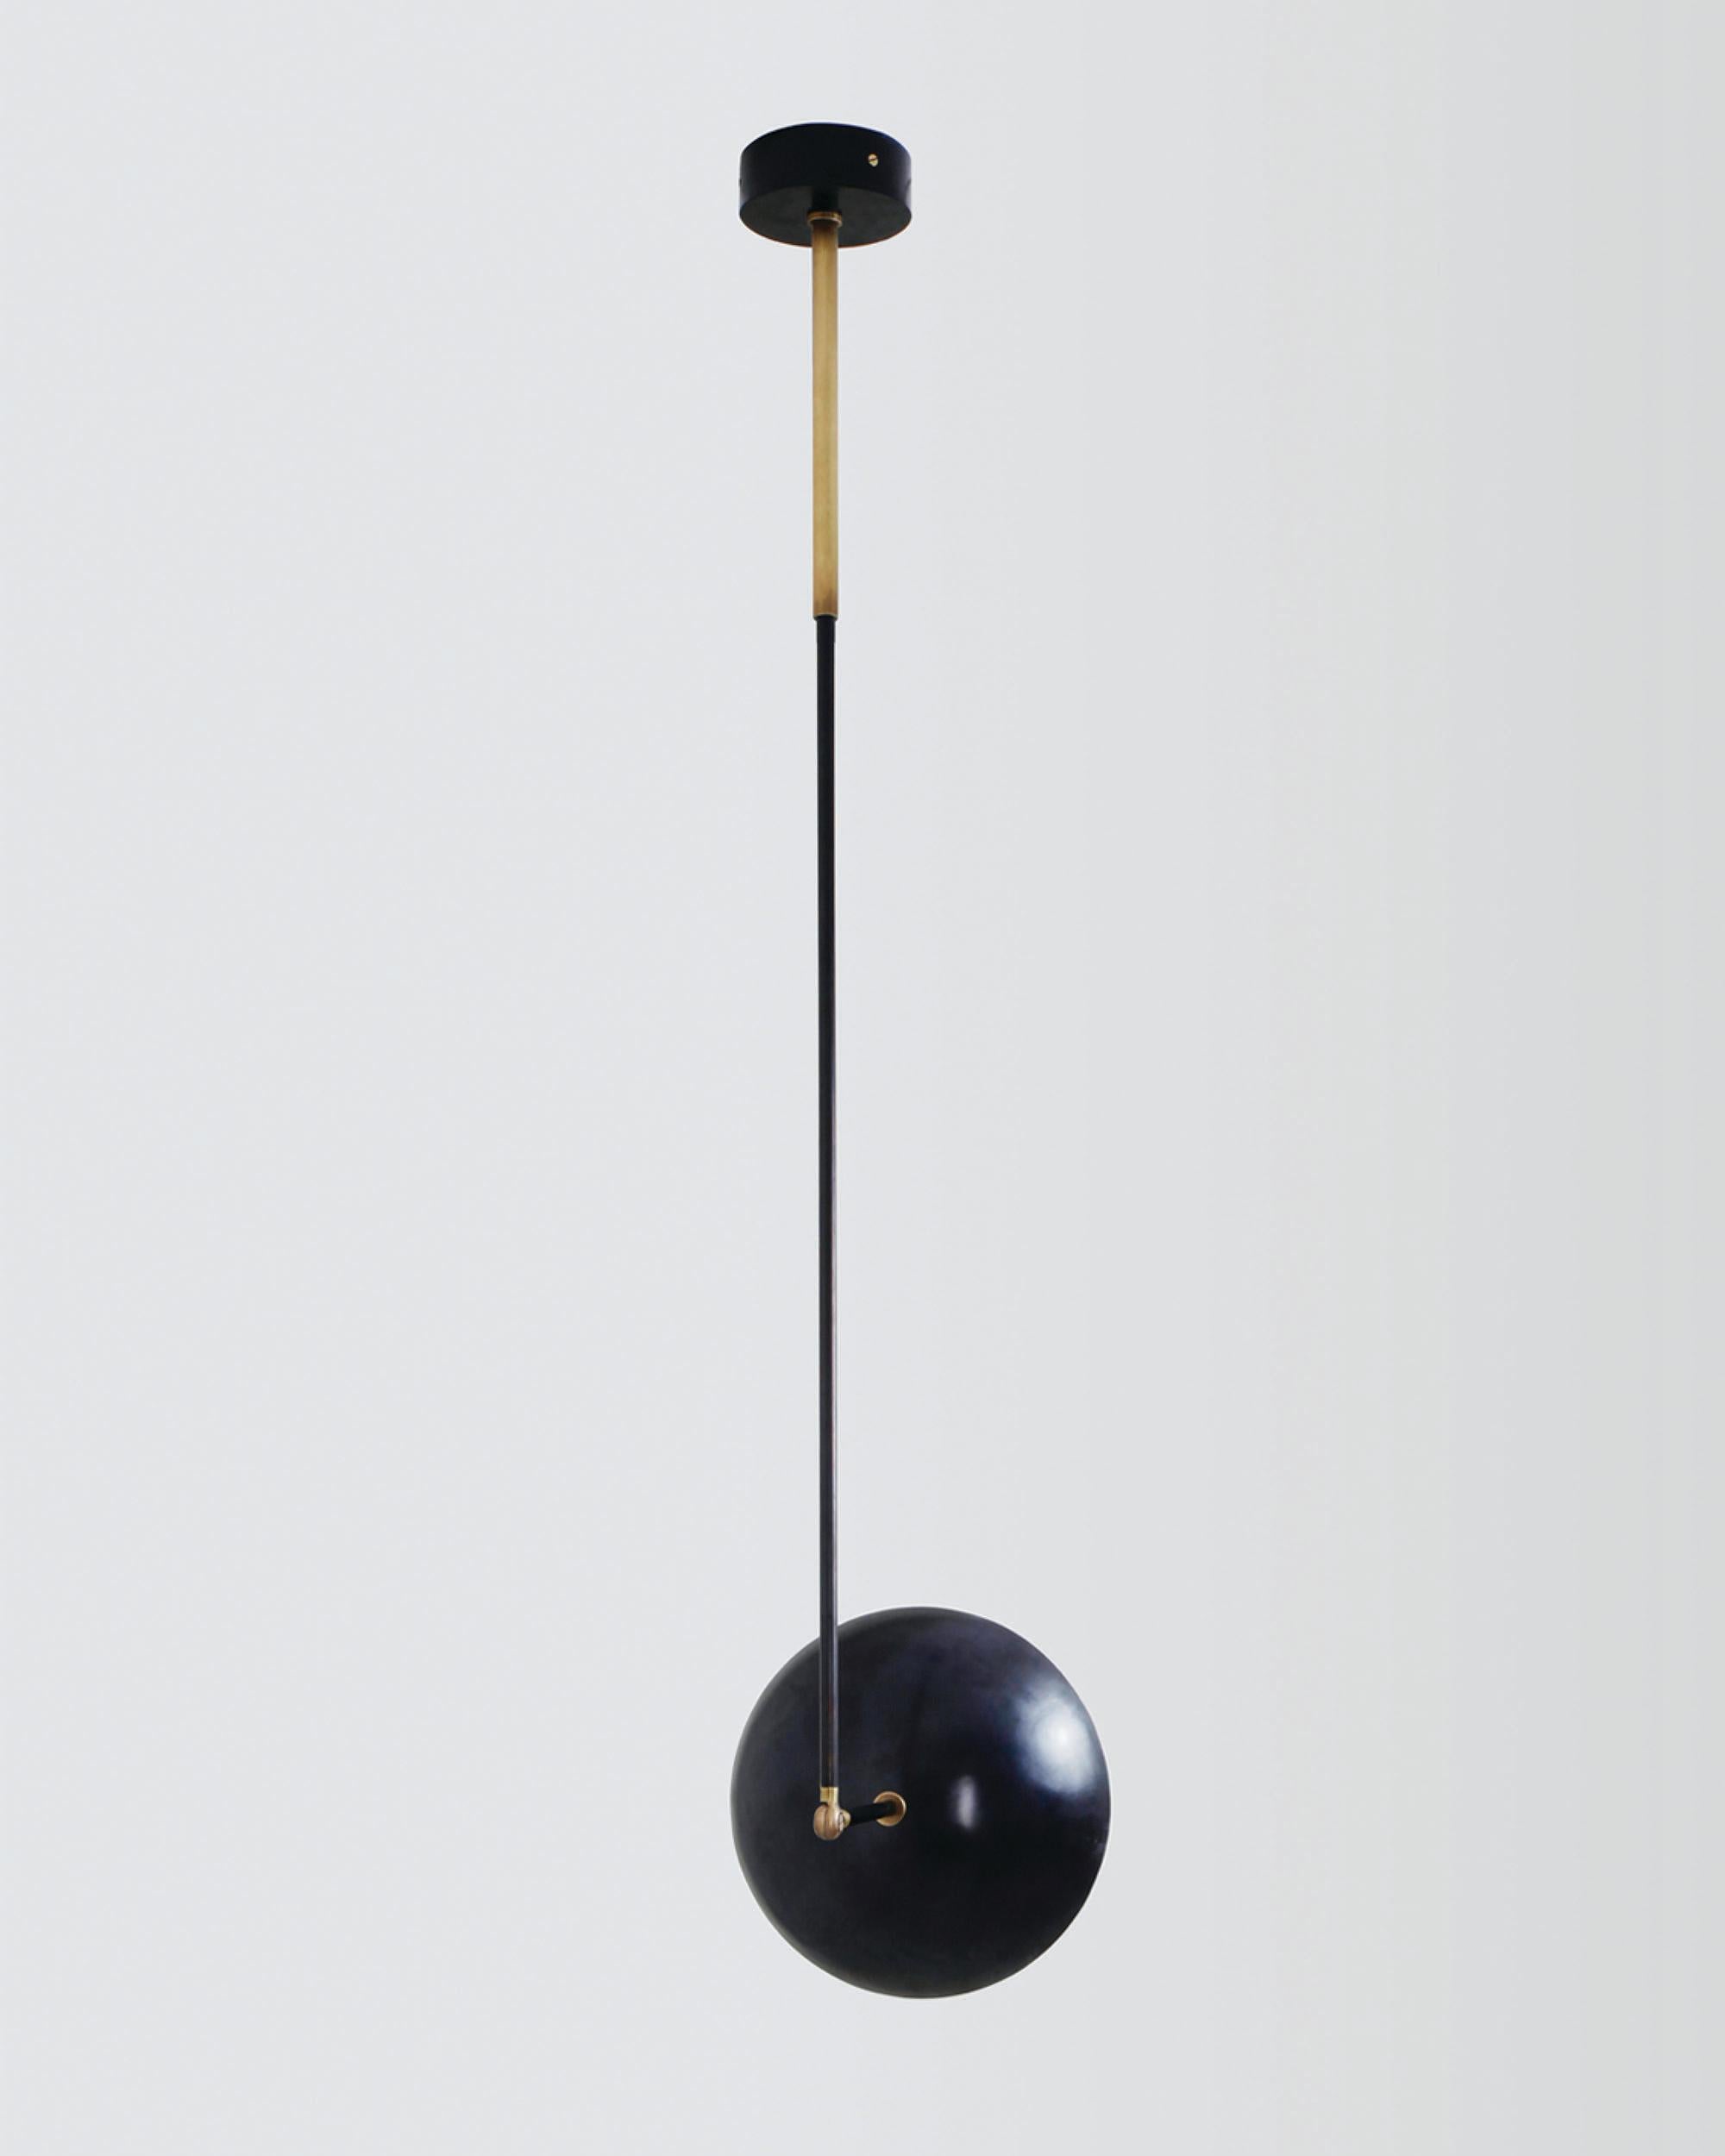 Contemporary Sculpted Brass Pendant, Tango One Dome by Paul Matter

Tango is born from playful experimentation with vintage lighting components.
Burnt, aged brass and etched glass are combined to create lighting fixtures that fuse sculptural form